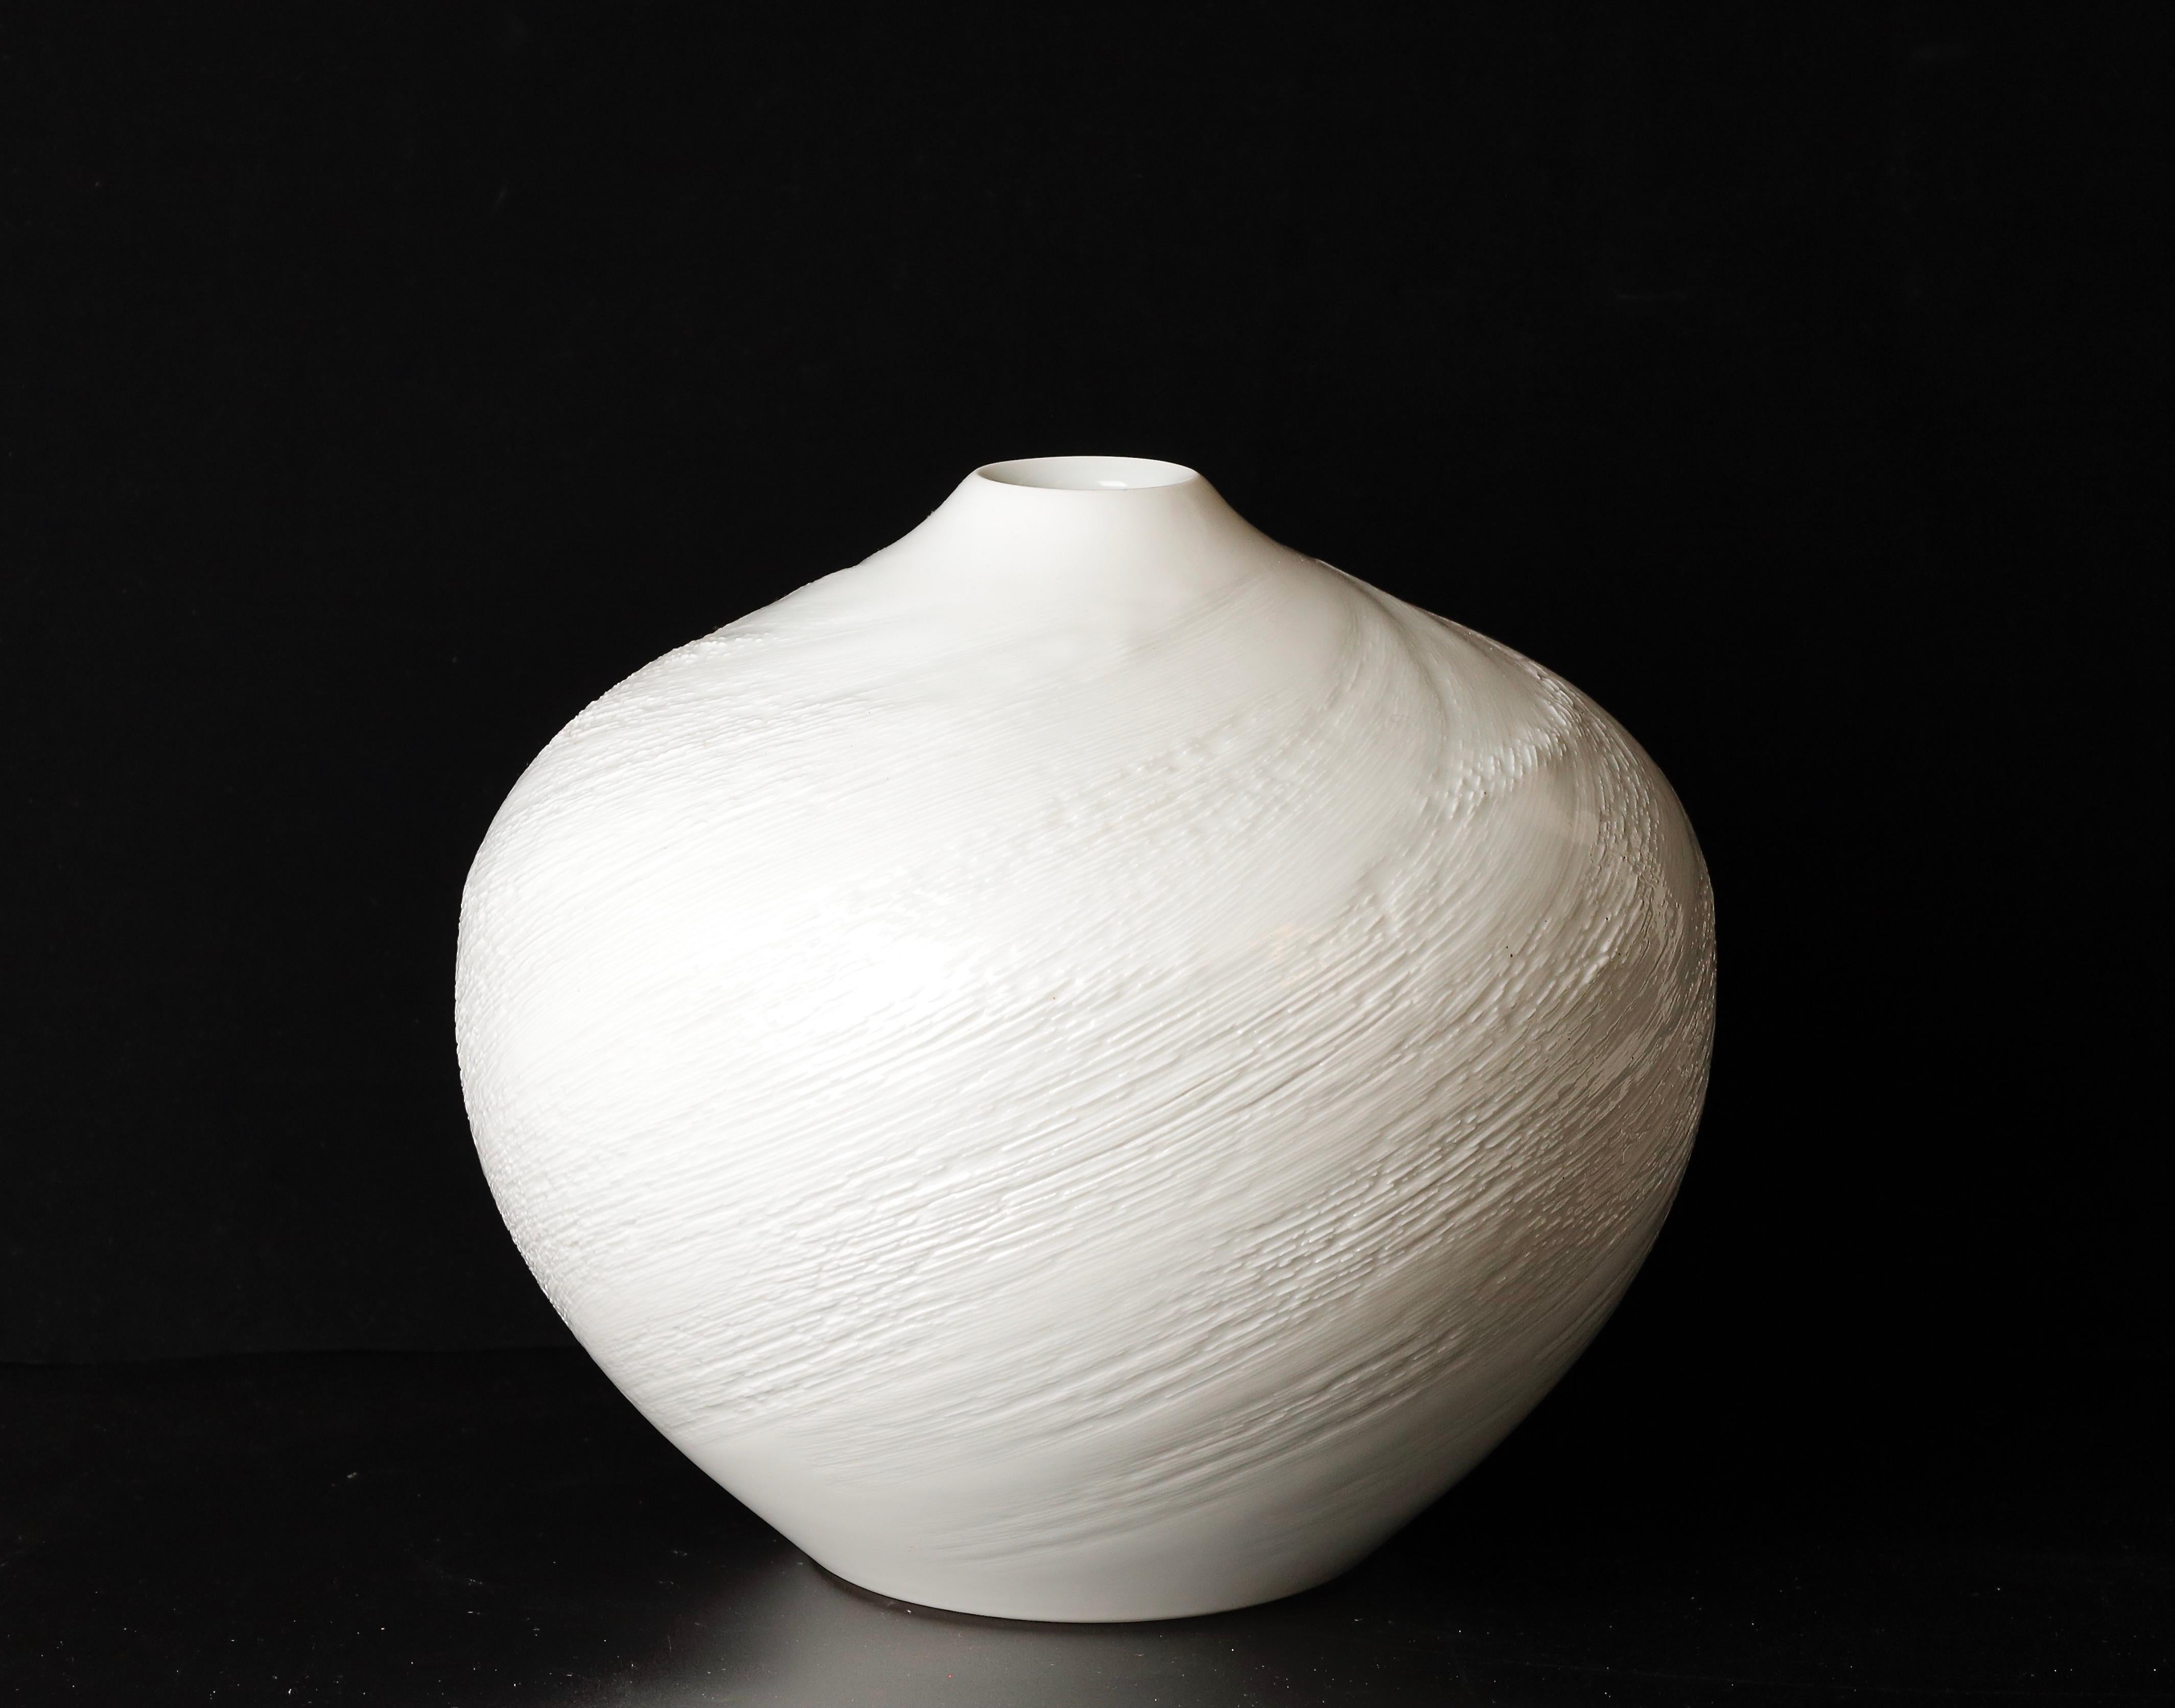 Japanese Exquisite Hand-Signed Arita Porcelain Vase, Contemporary Masterpiece by Yasushi For Sale